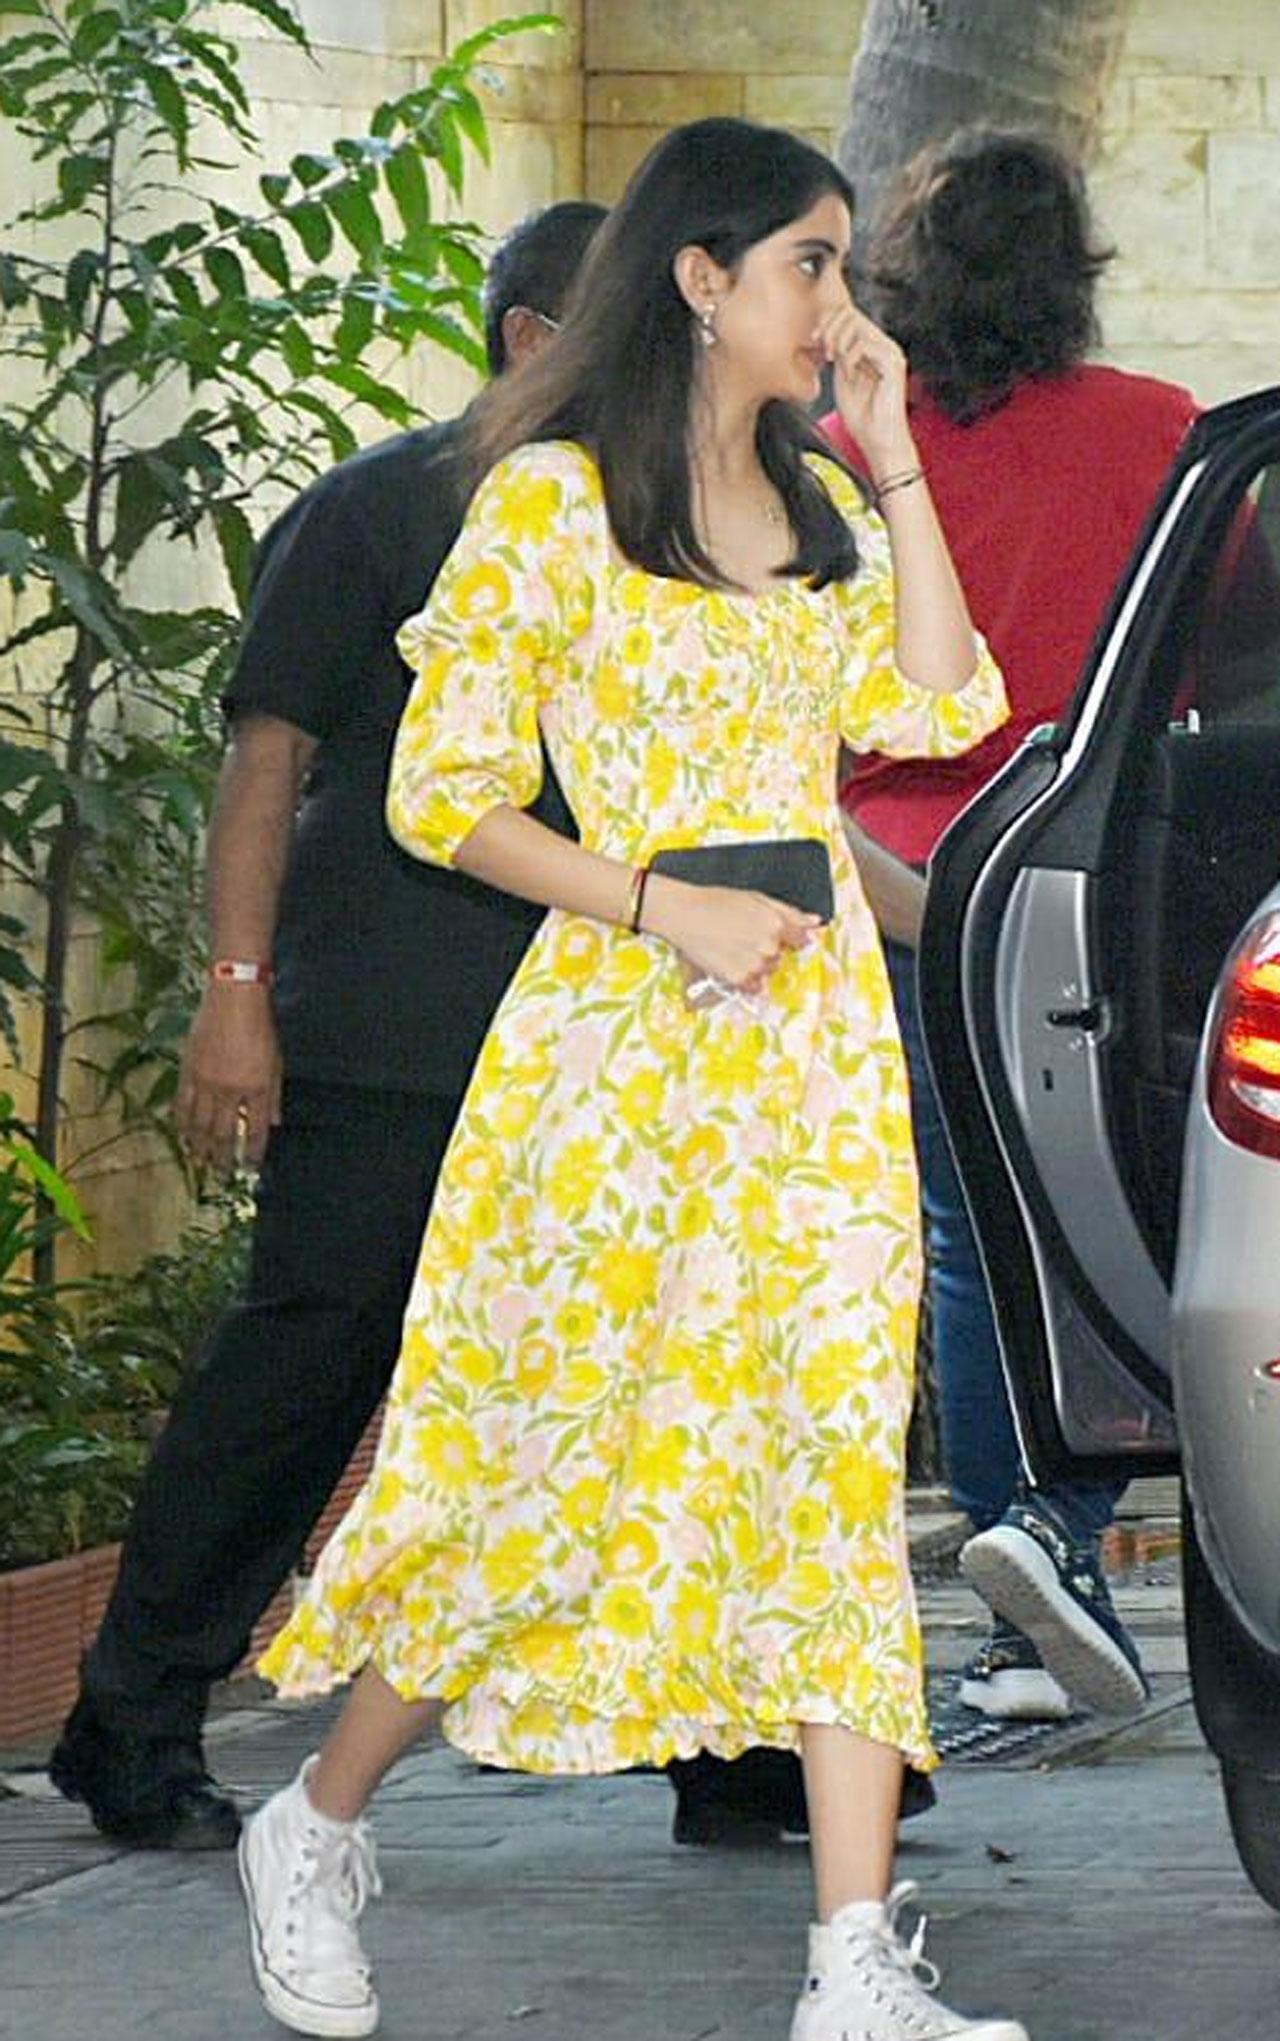 Navya Naveli Nanda, his sister, was also spotted by the paps. She donned a lovely yellow floral dress for the occasion.
 